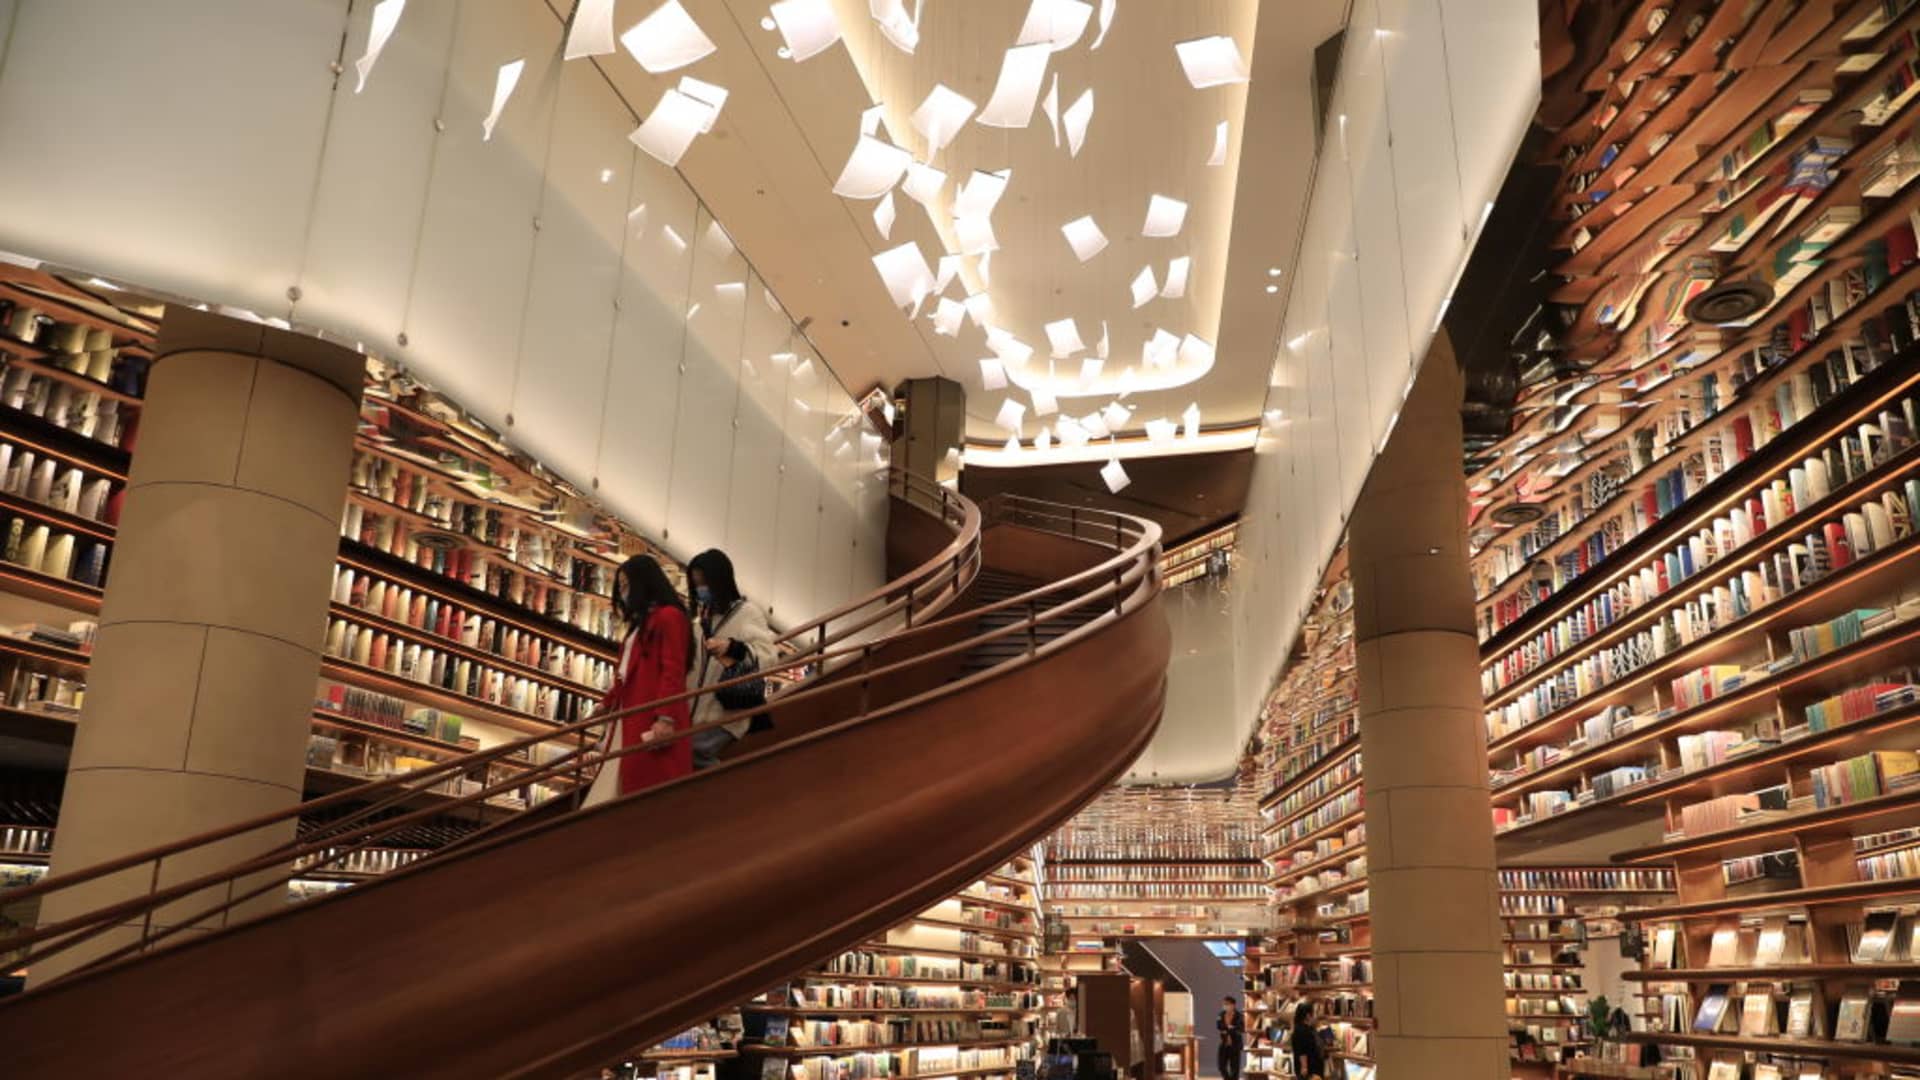 A look inside the TSUTAYA bookstore on March 29, 2021, Xi'an City, Shaanxi Province, China.